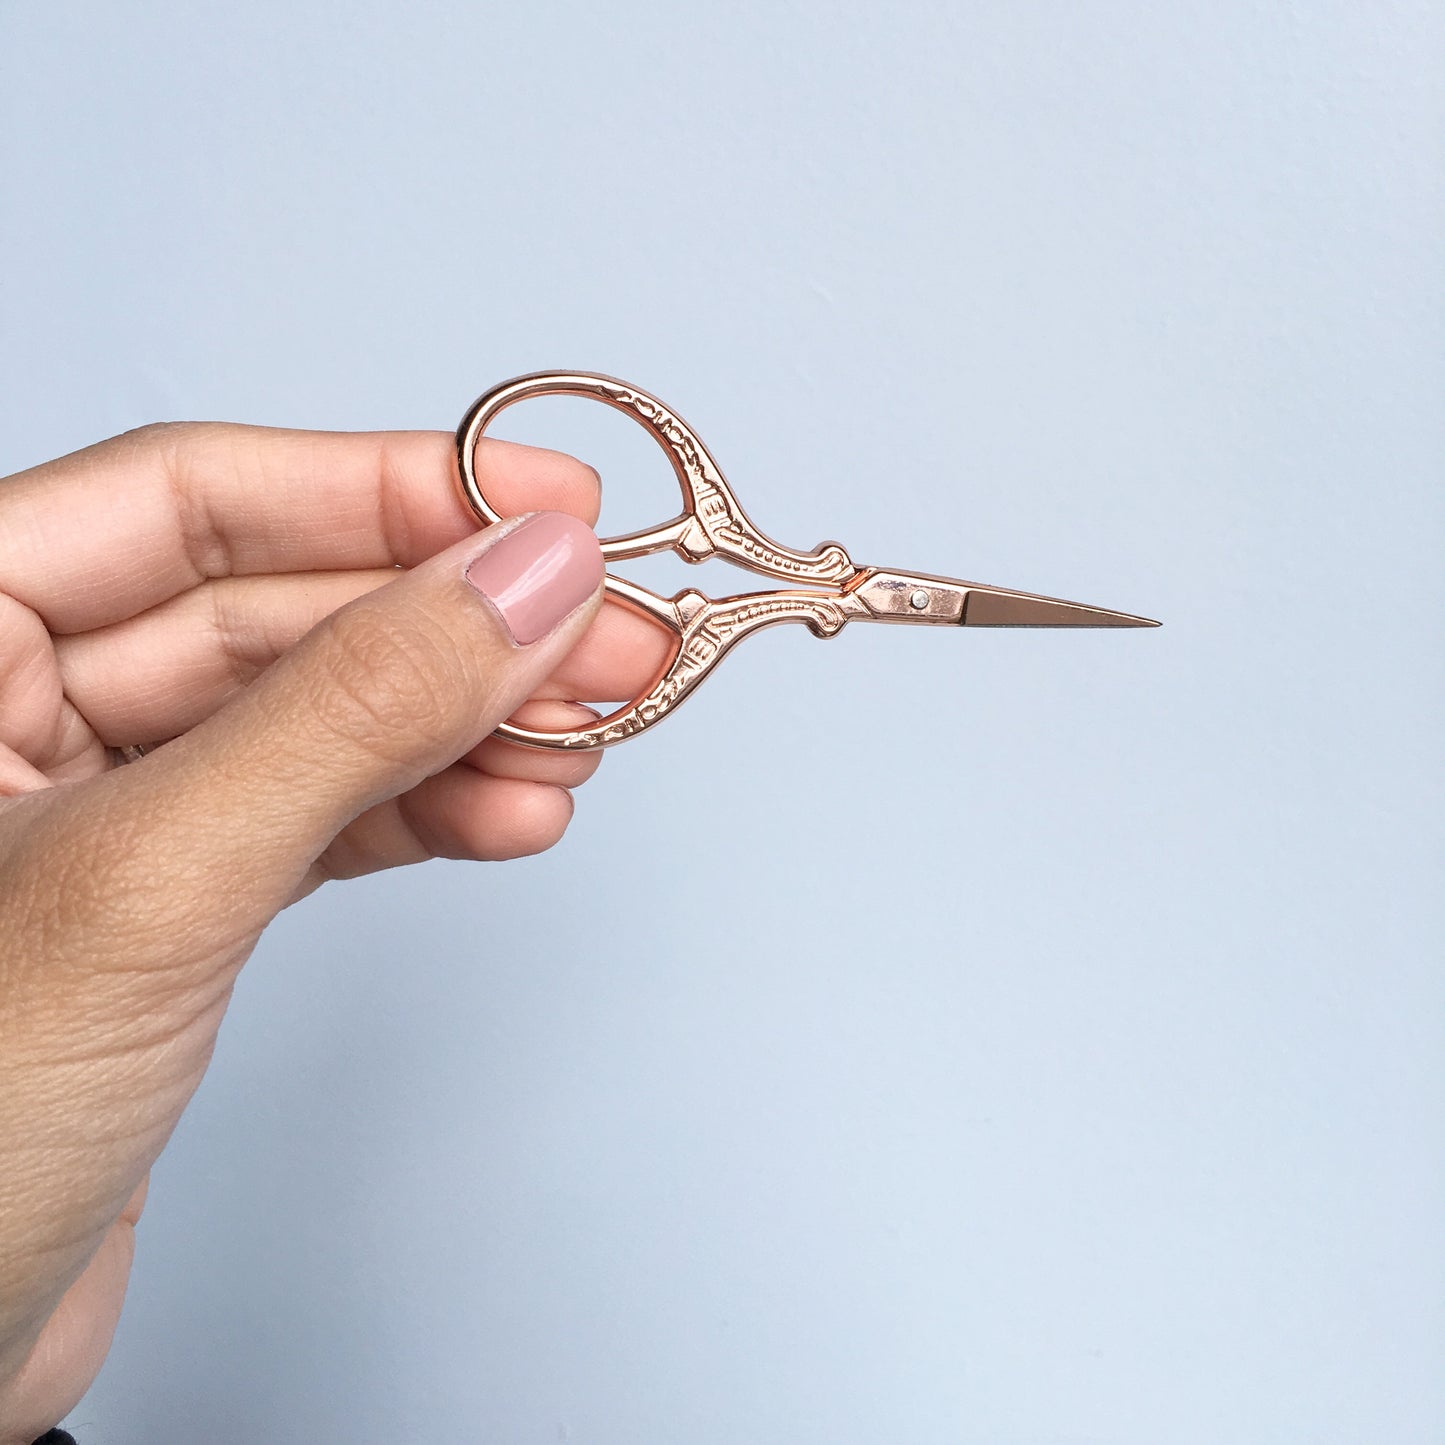 Leyah Antique Style Rose Gold Stainless Steel Embroidery Scissors